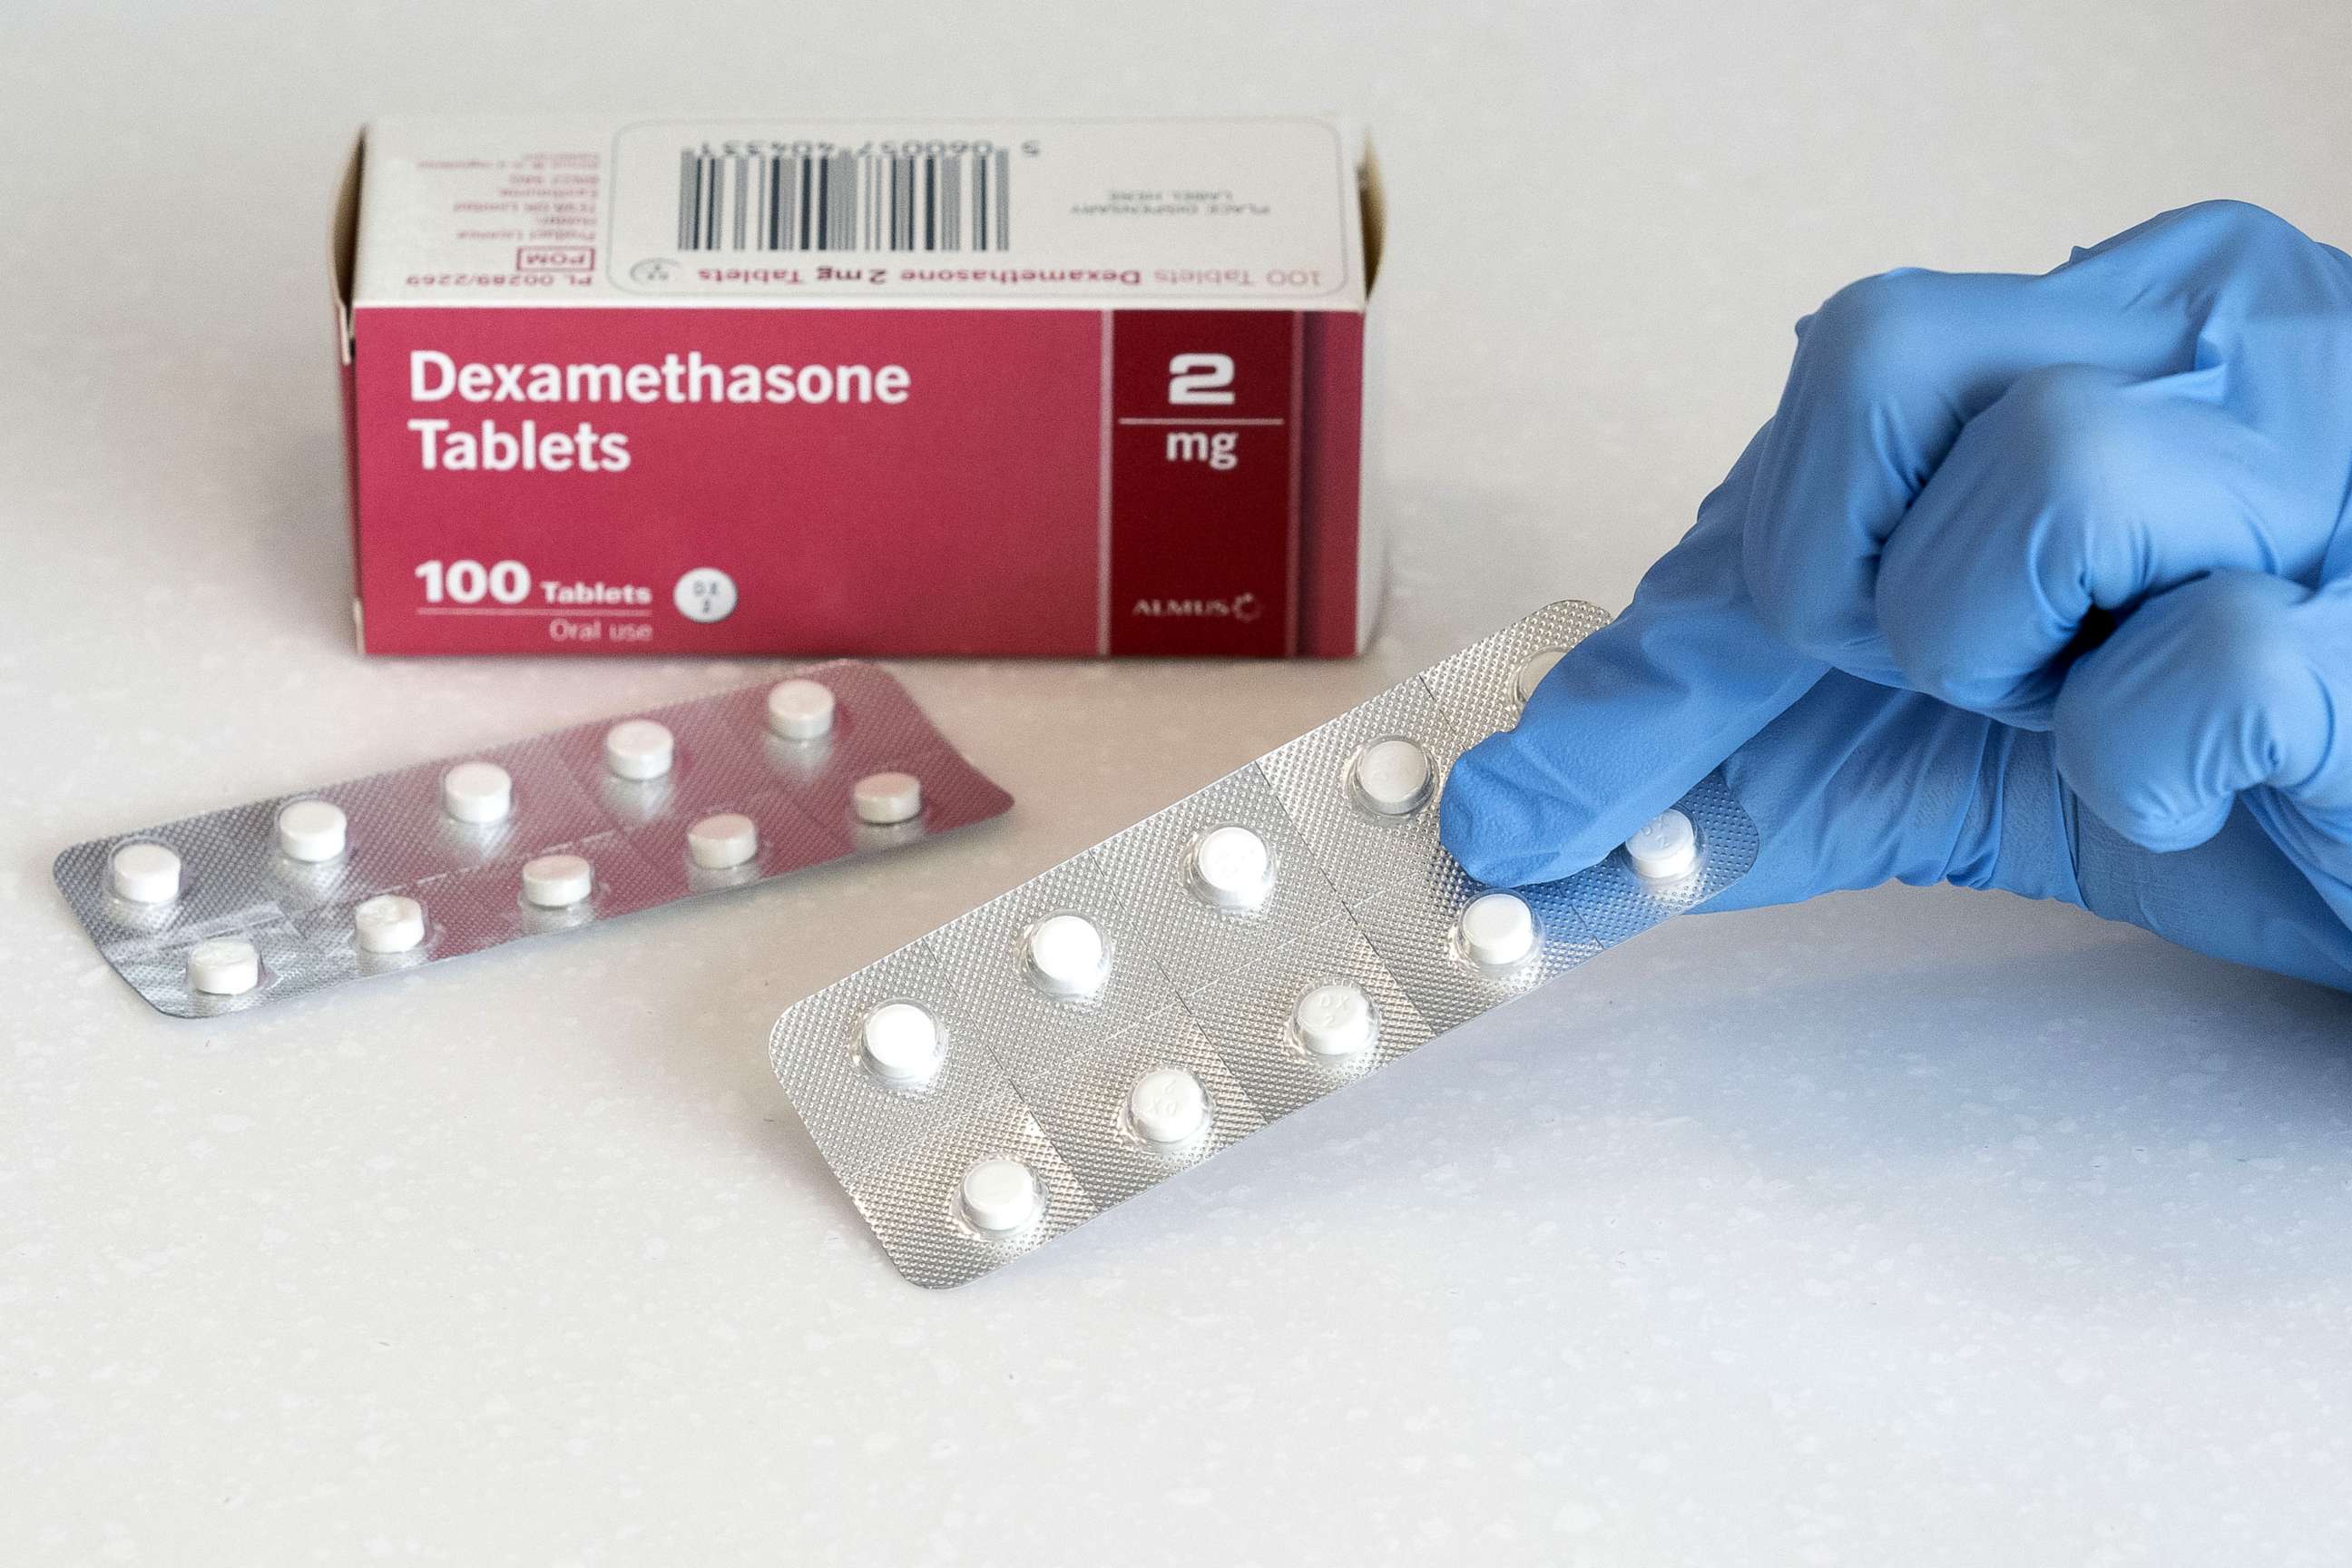 PHOTO: A close-up of a box of Dexamethasone tablets in a pharmacy on June 16, 2020, in Cardiff, United Kingdom.